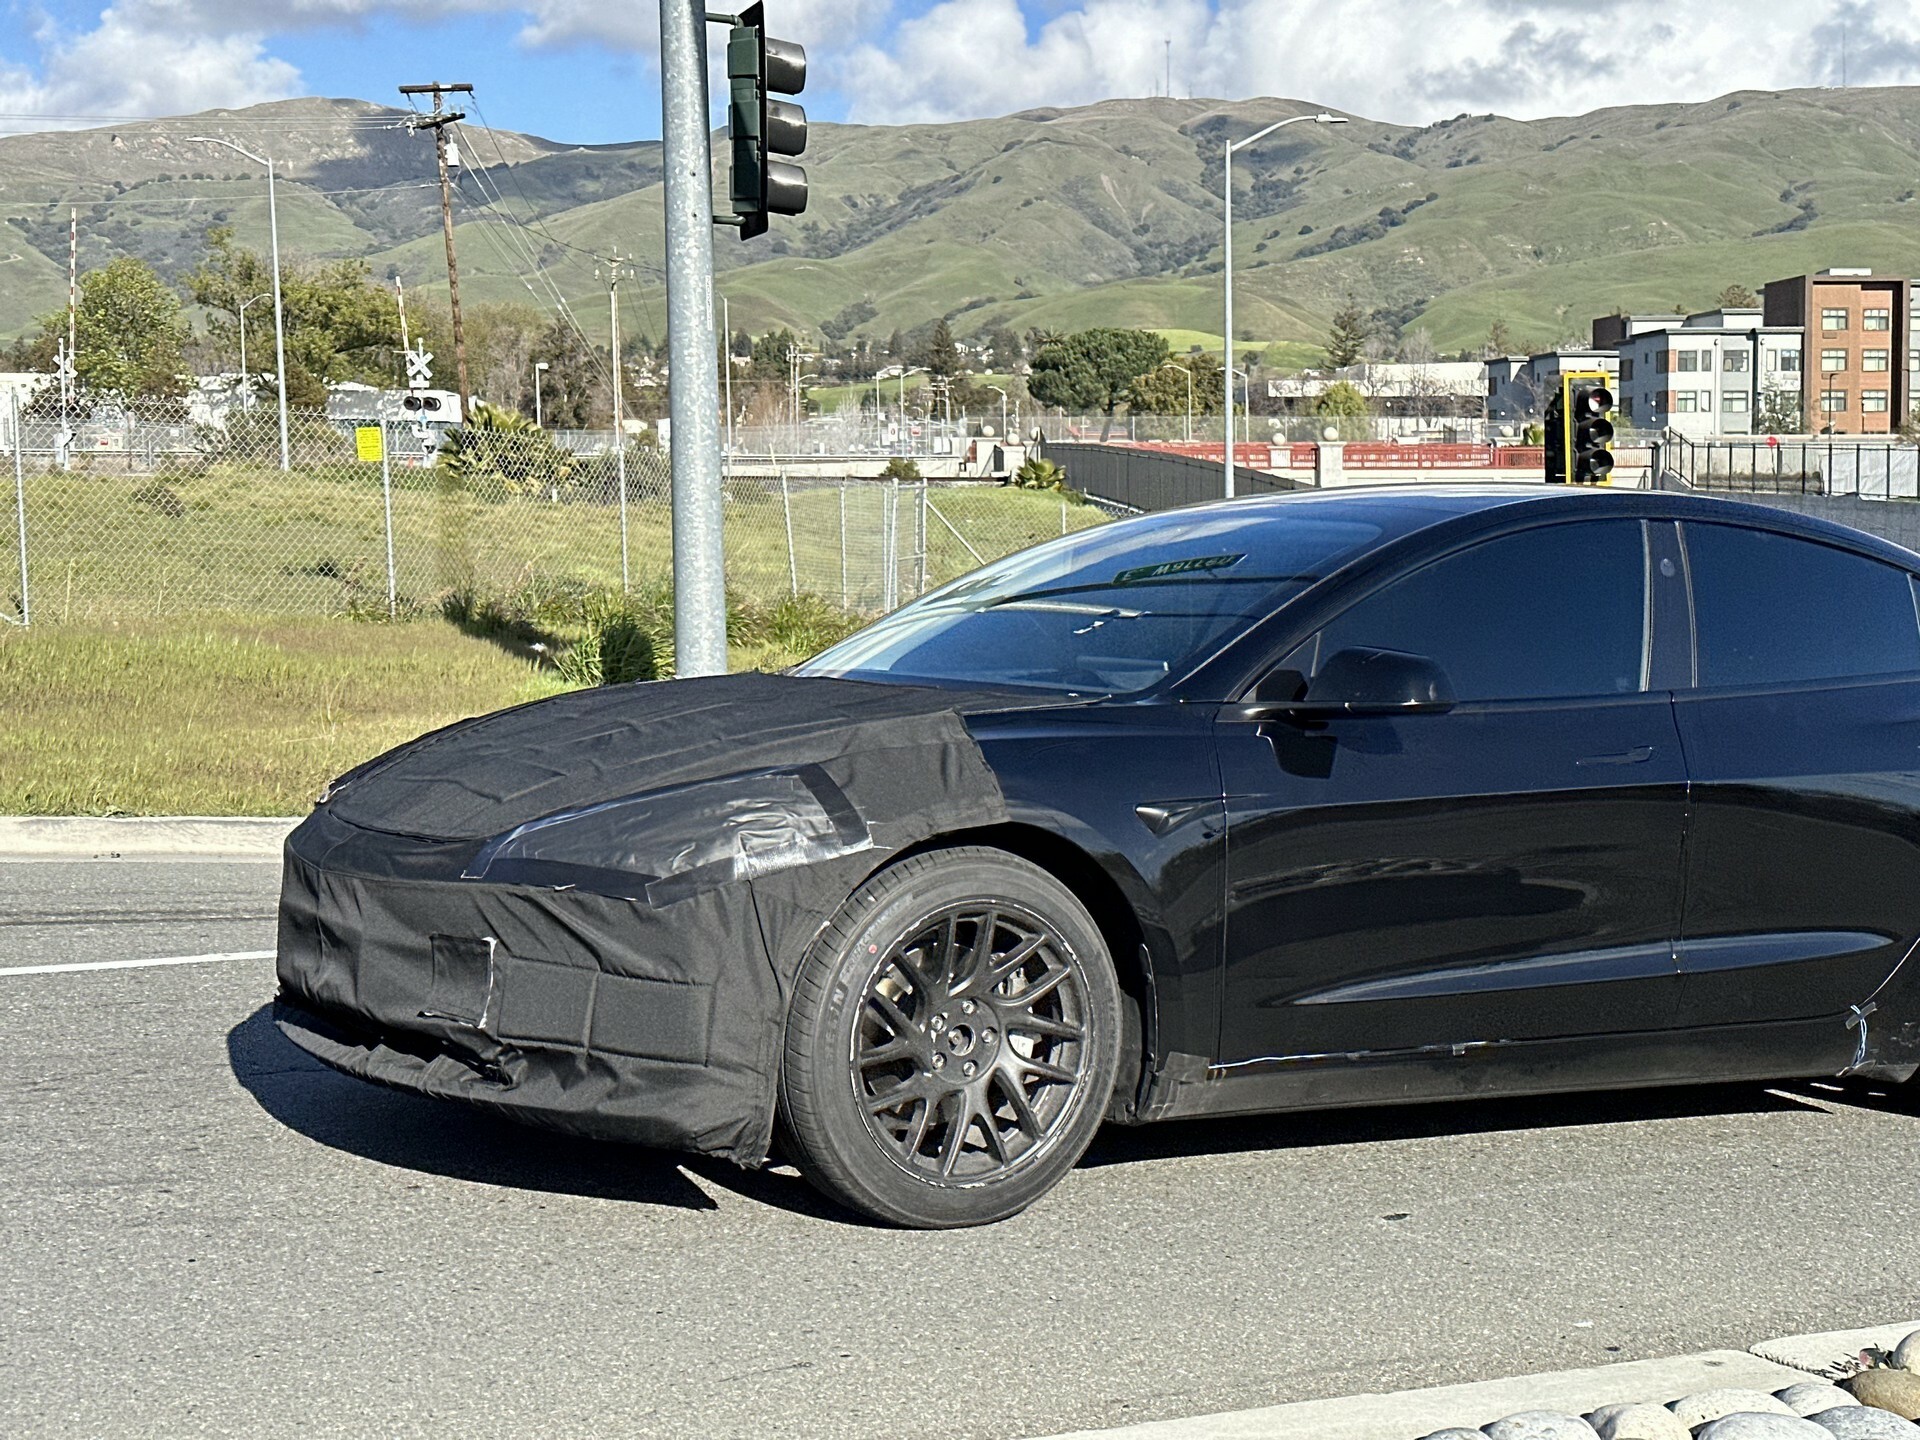 Refreshed Tesla Model 3 Tests Out New Wheels And Side Camera